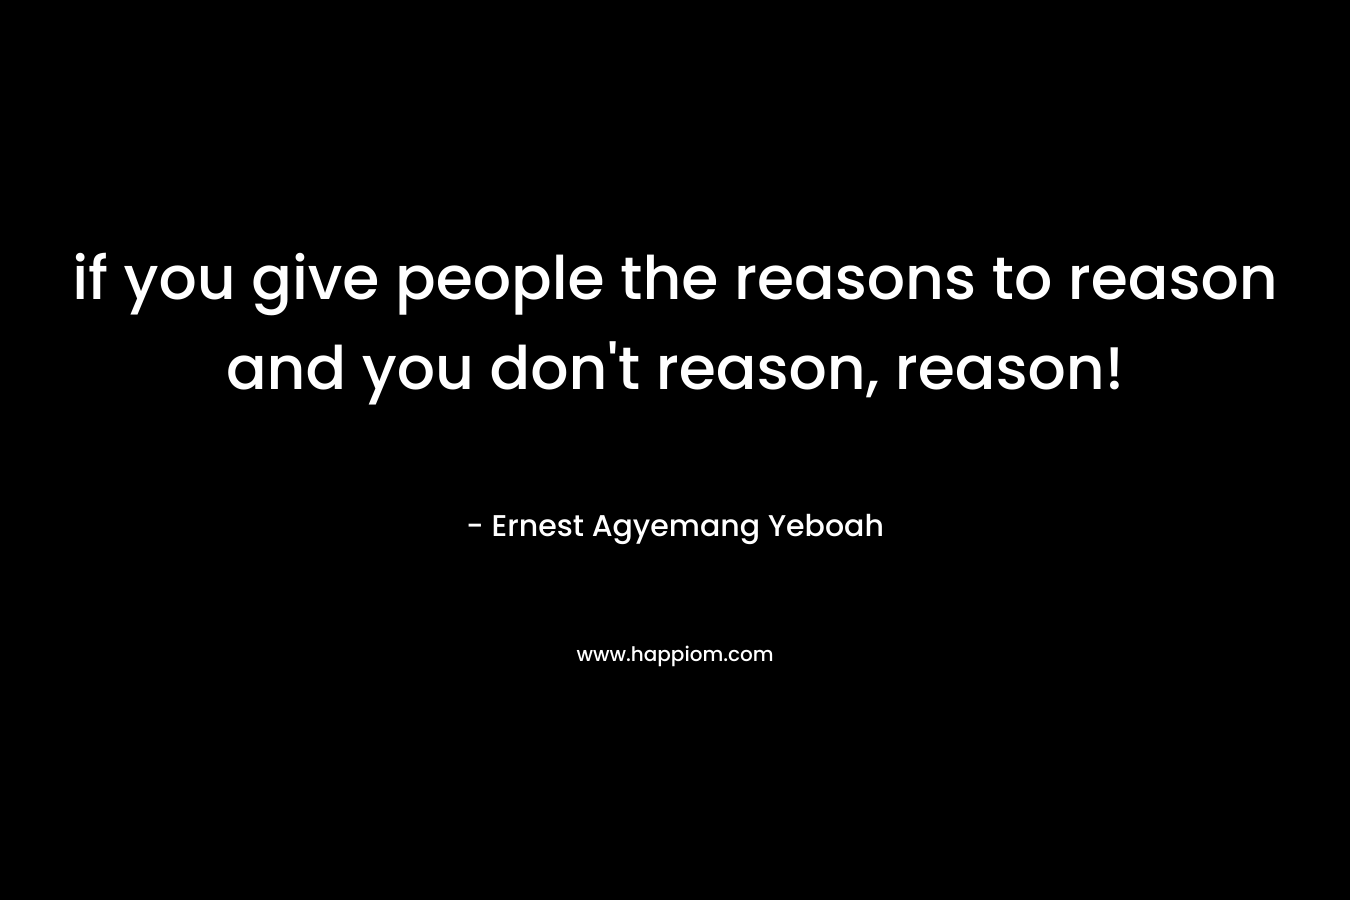 if you give people the reasons to reason and you don't reason, reason!